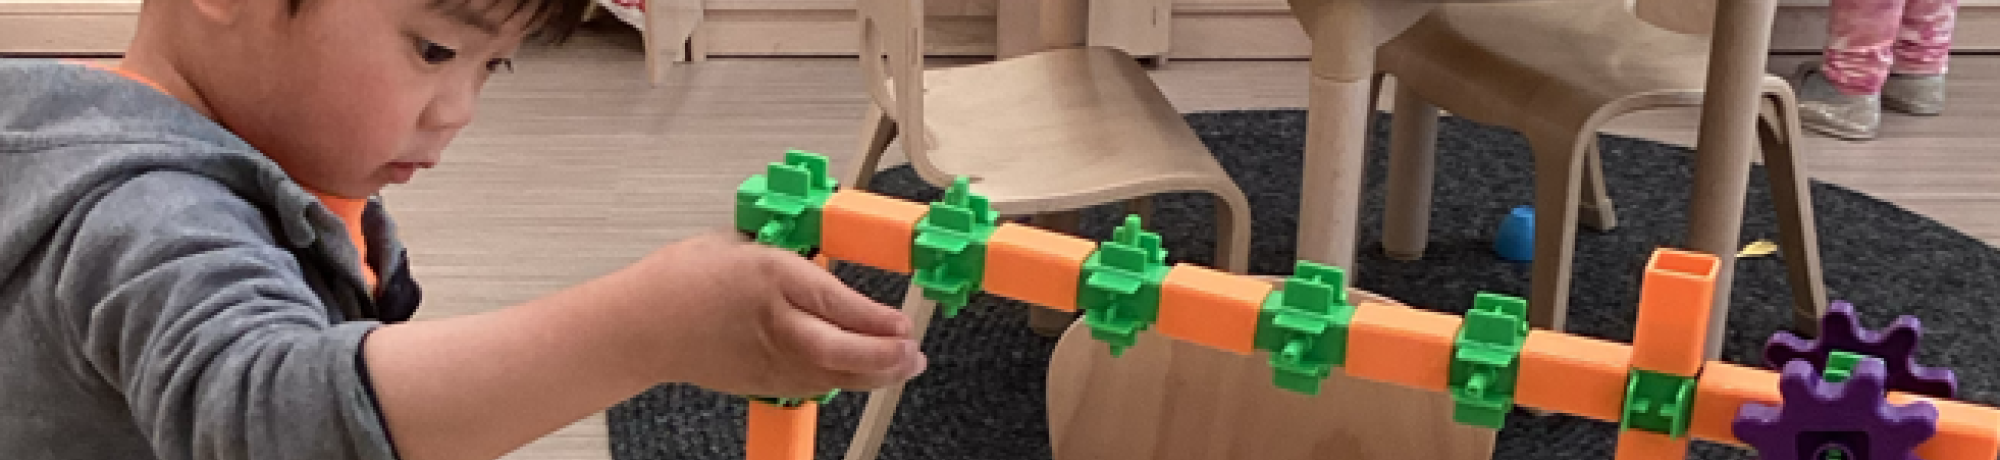 child playing with building toys